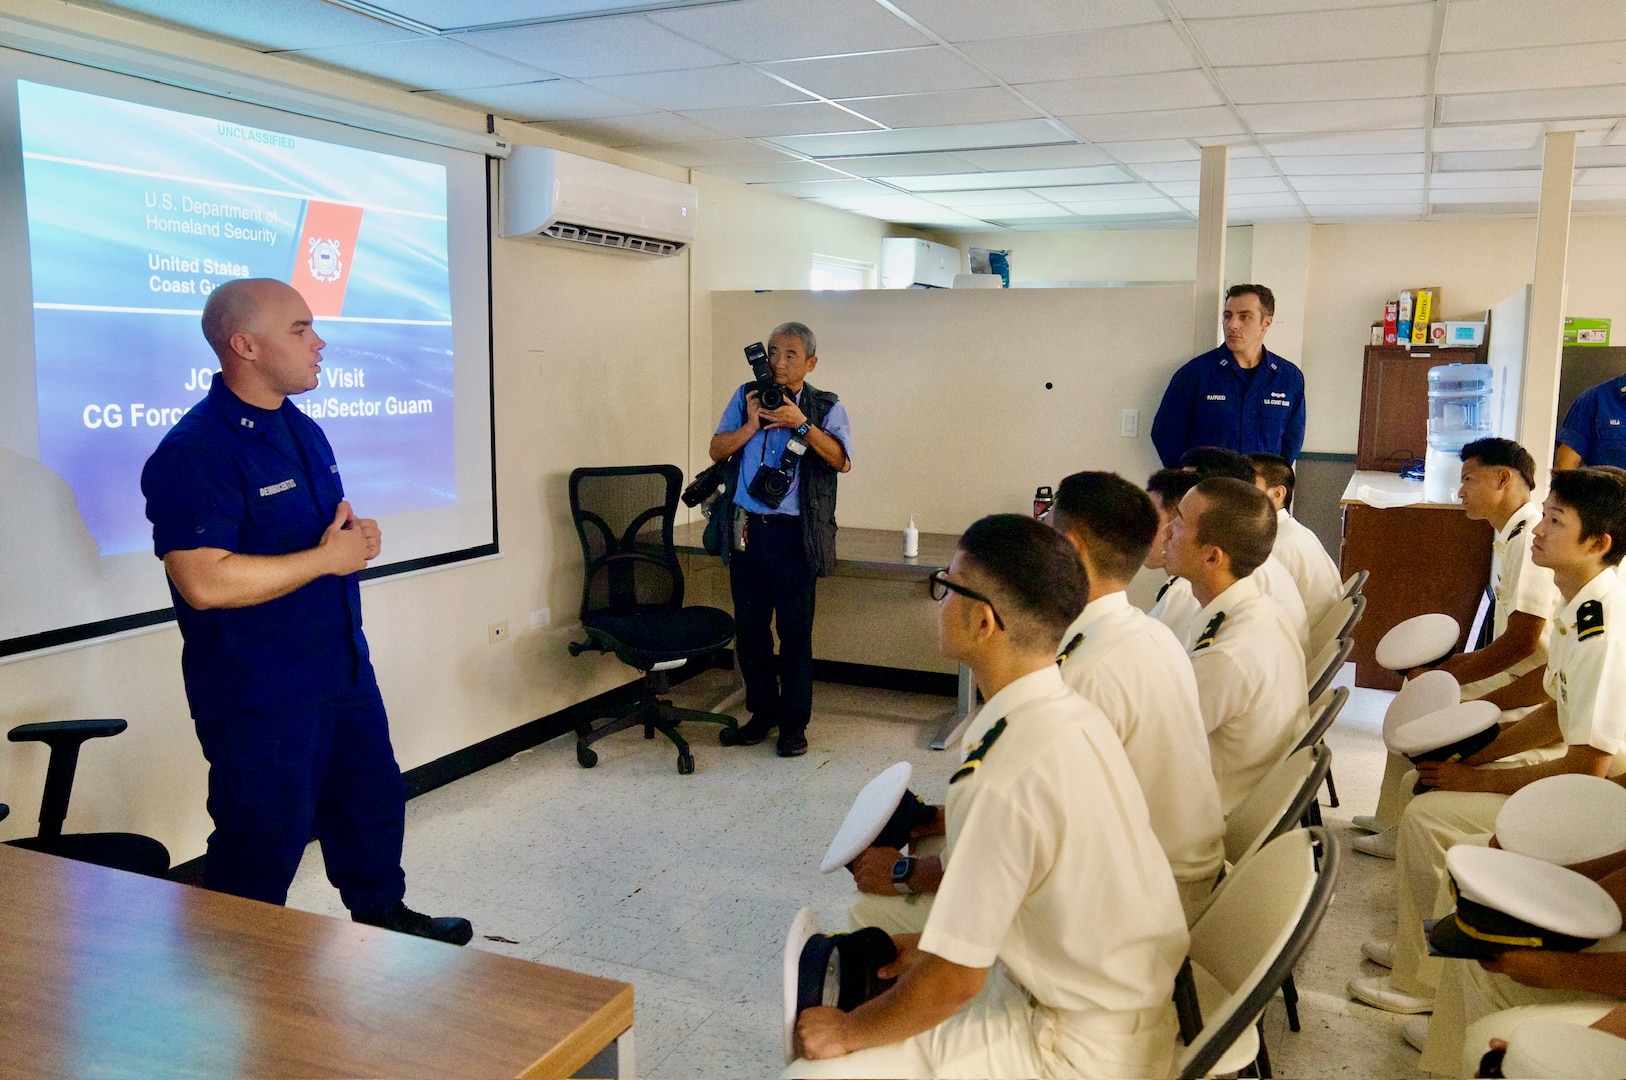 Lt. Jay DeInnocentiis gives an overview of waterways management at U.S. Coast Guard Forces Micronesia Sector Guam as they host Capt. Kazushi Sakae and over 40 cadets from the Japanese Coast Guard training ship Kojima during their visit to Guam on June 12, 2024. The event marked a significant moment of international cooperation and camaraderie between the two maritime services. (U.S. Coast Guard photo by Josiah Moss)